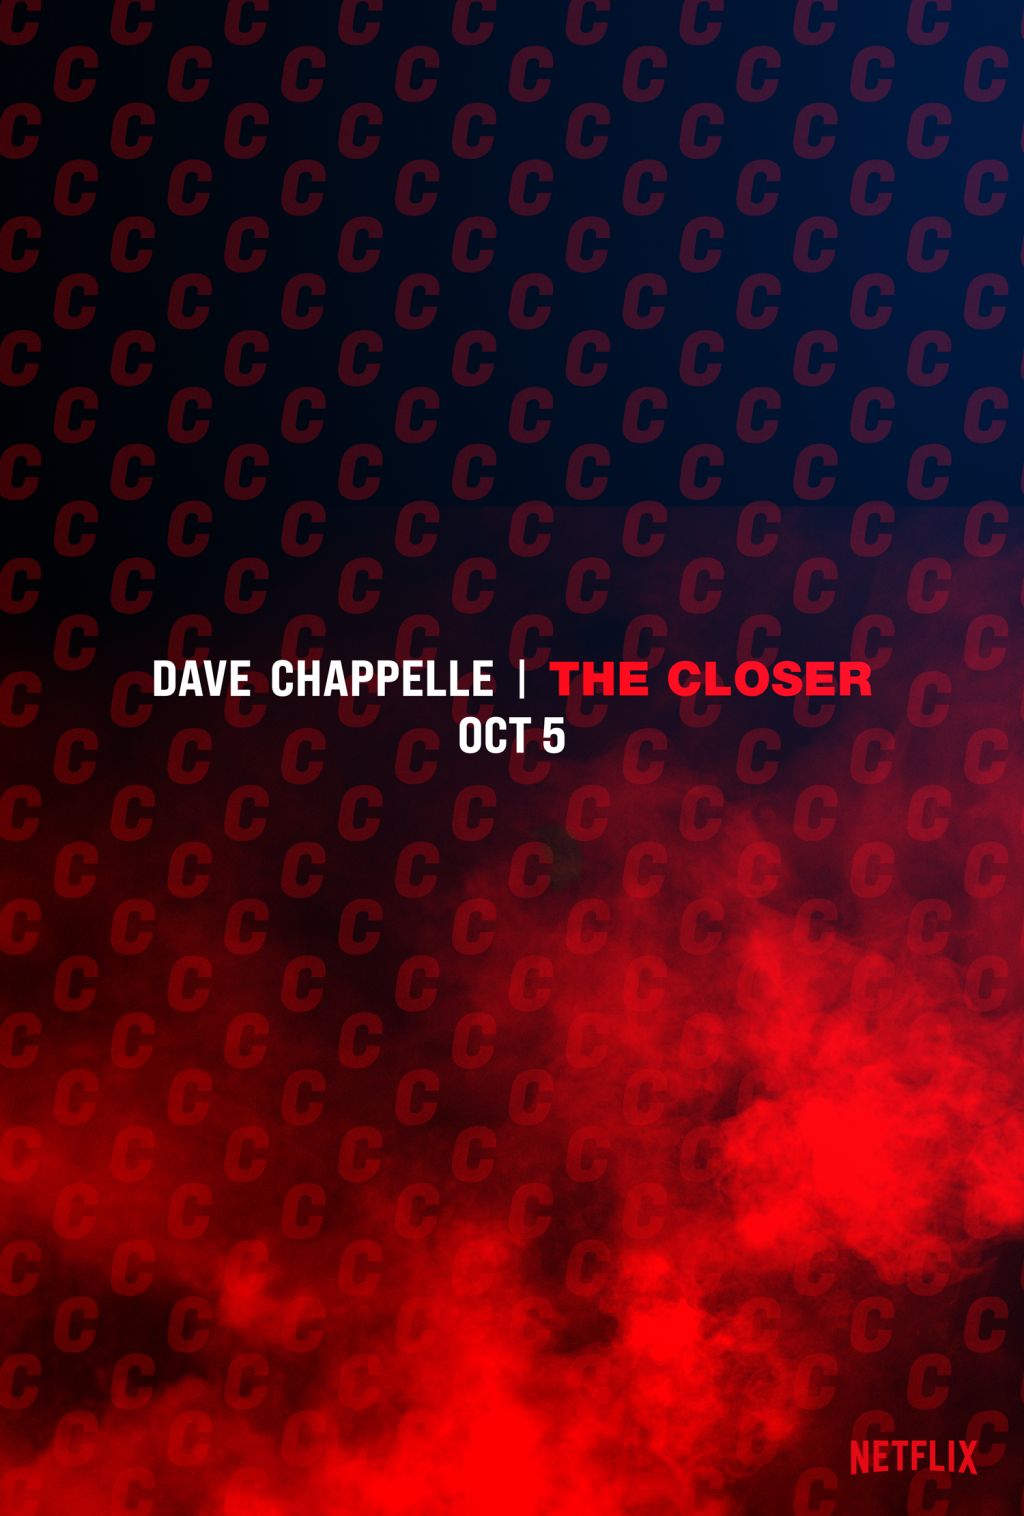 Dave Chappelle | The Closer